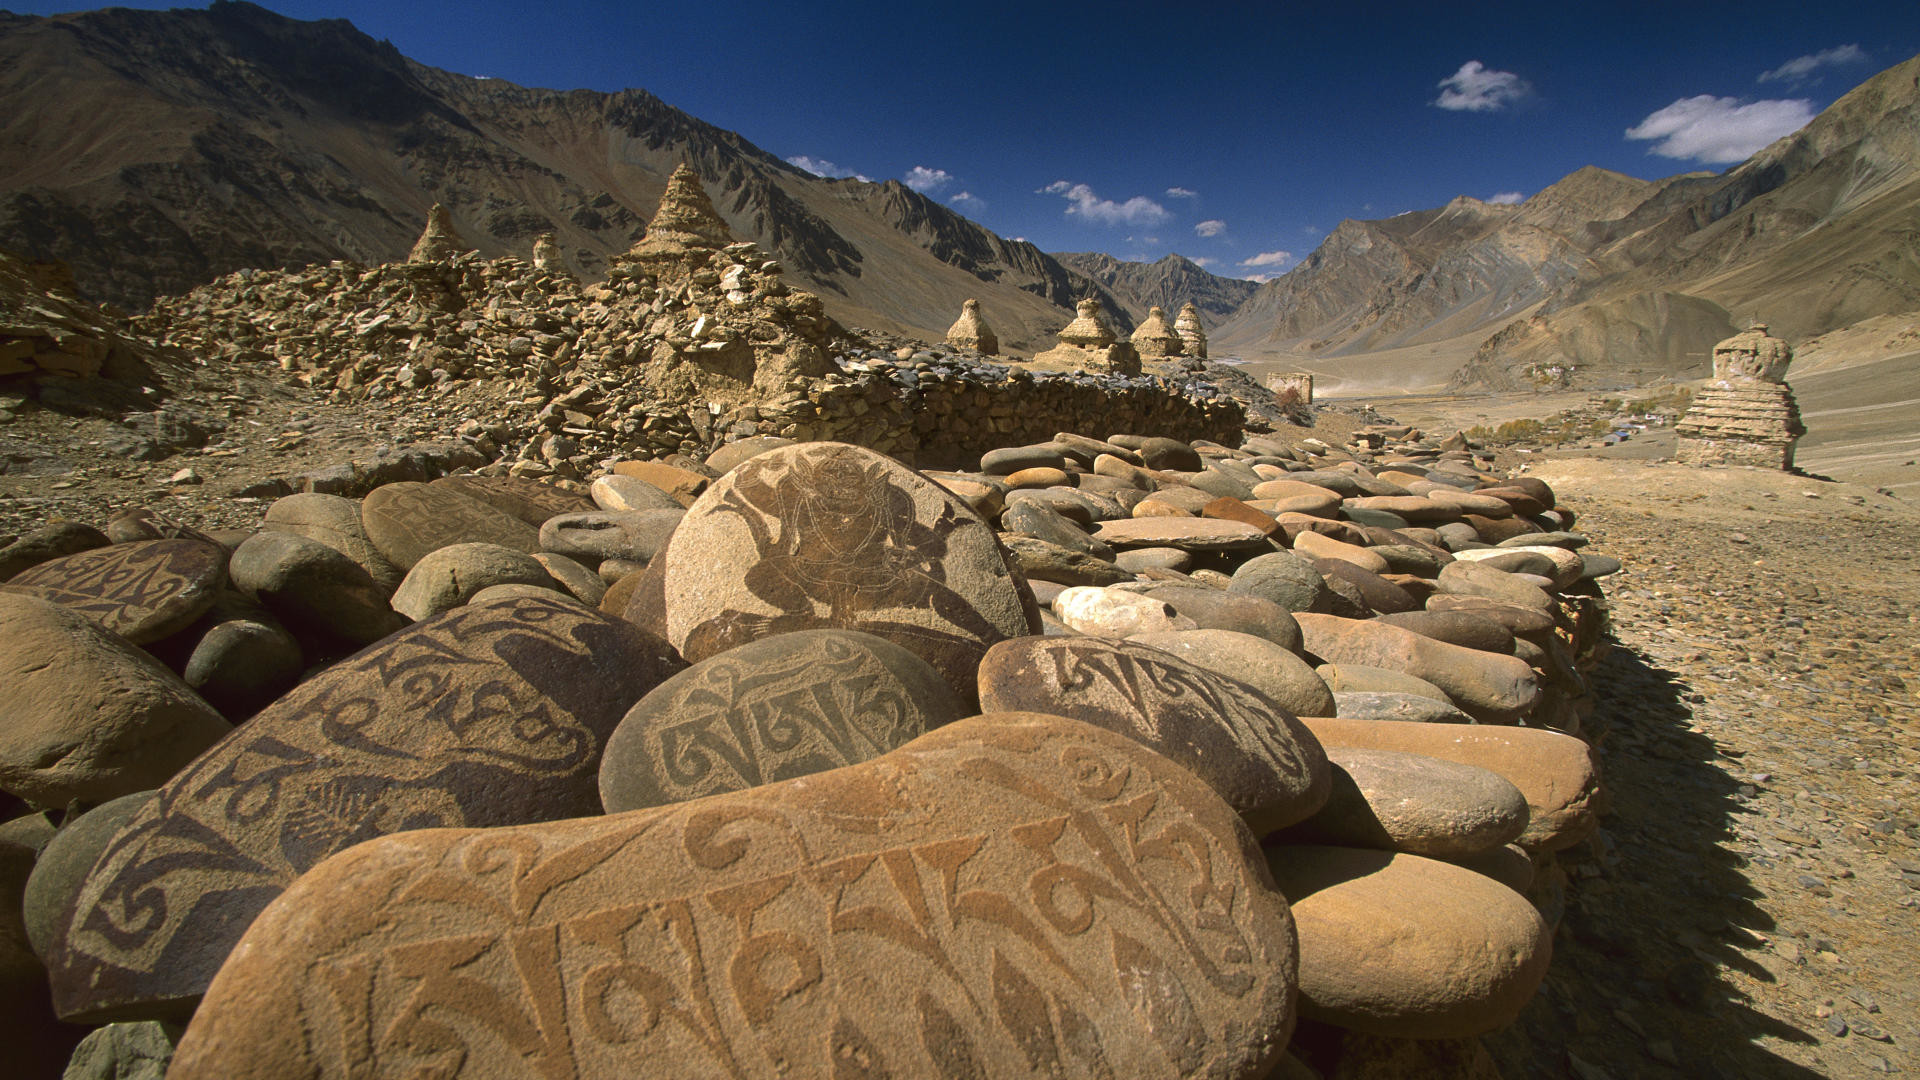 1920x1080 Download Background - Carved Buddhist Mani Stones, Zangla, Kingdom of  Zanskar, India - Free Cool Backgrounds and Wallpapers for your Desktop Or  Laptop.